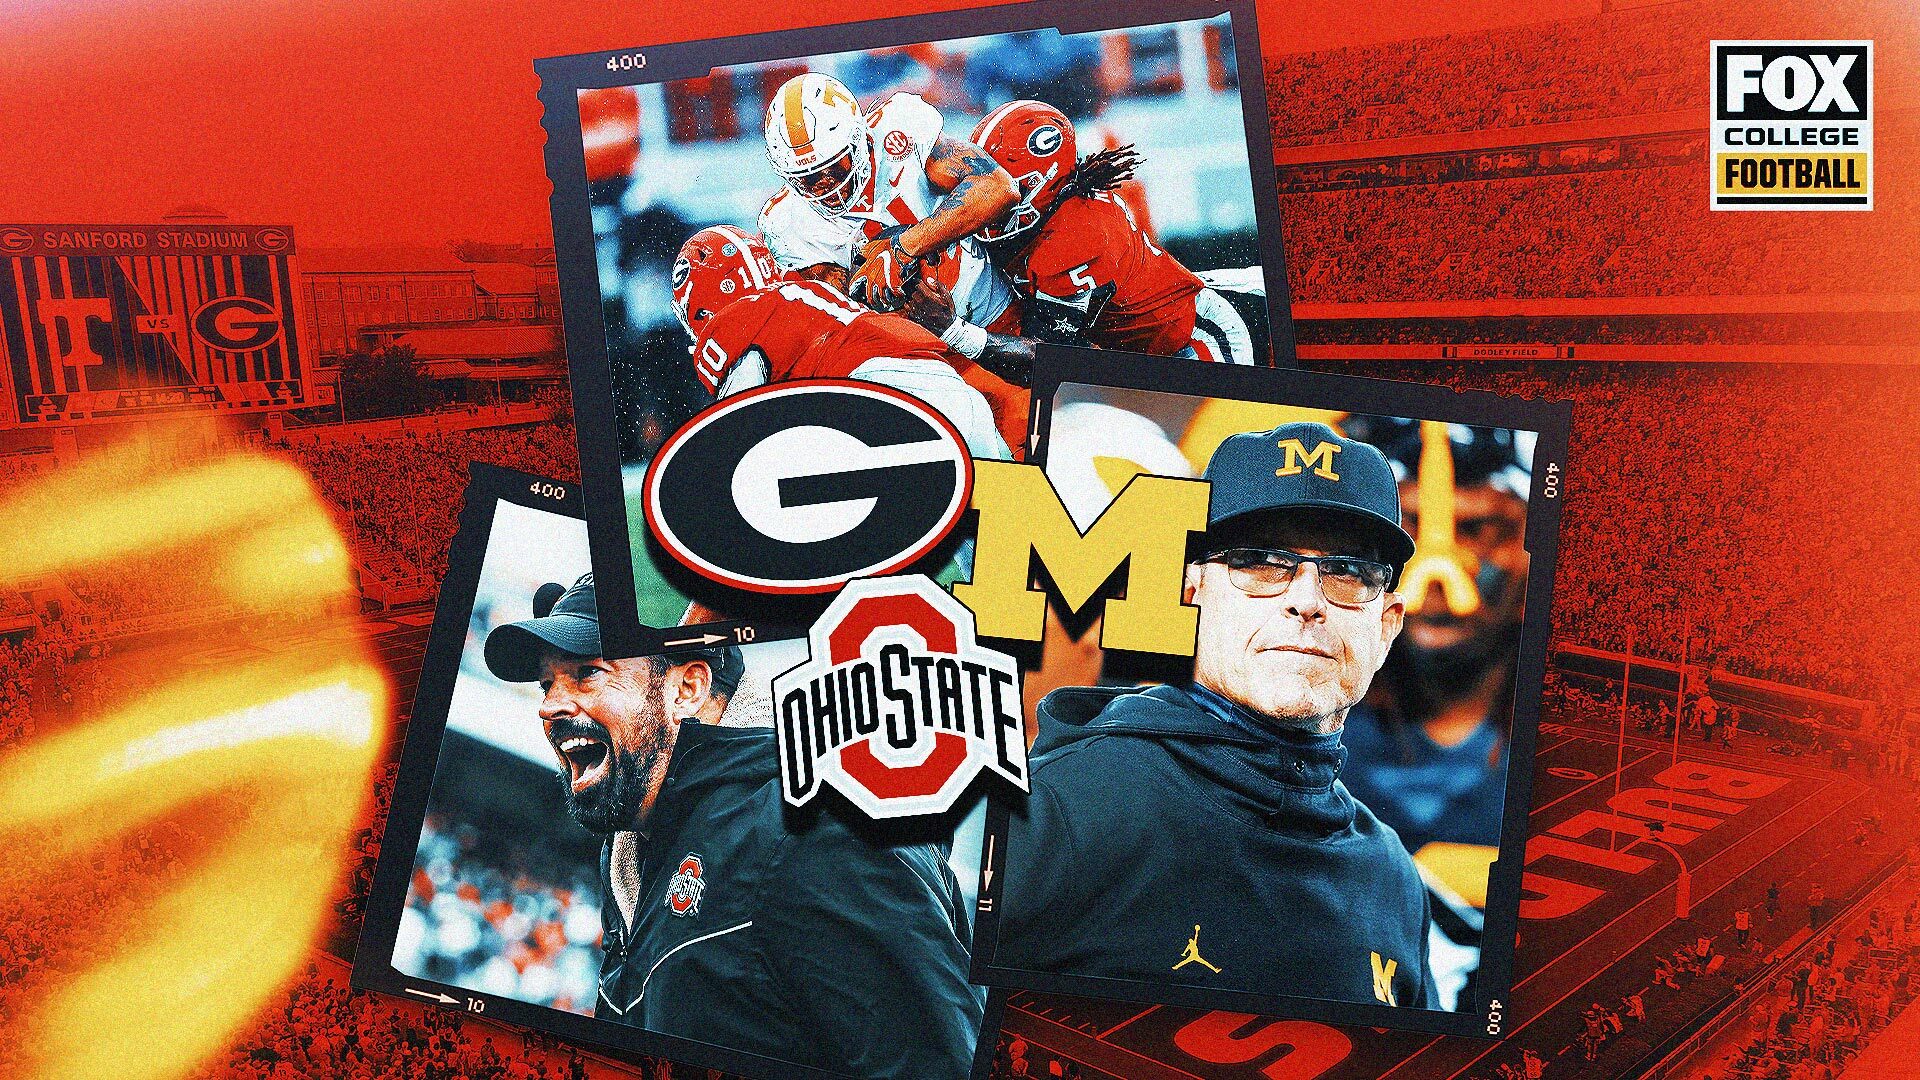 What Georgia's big win, SEC chaos mean for Ohio State and Michigan